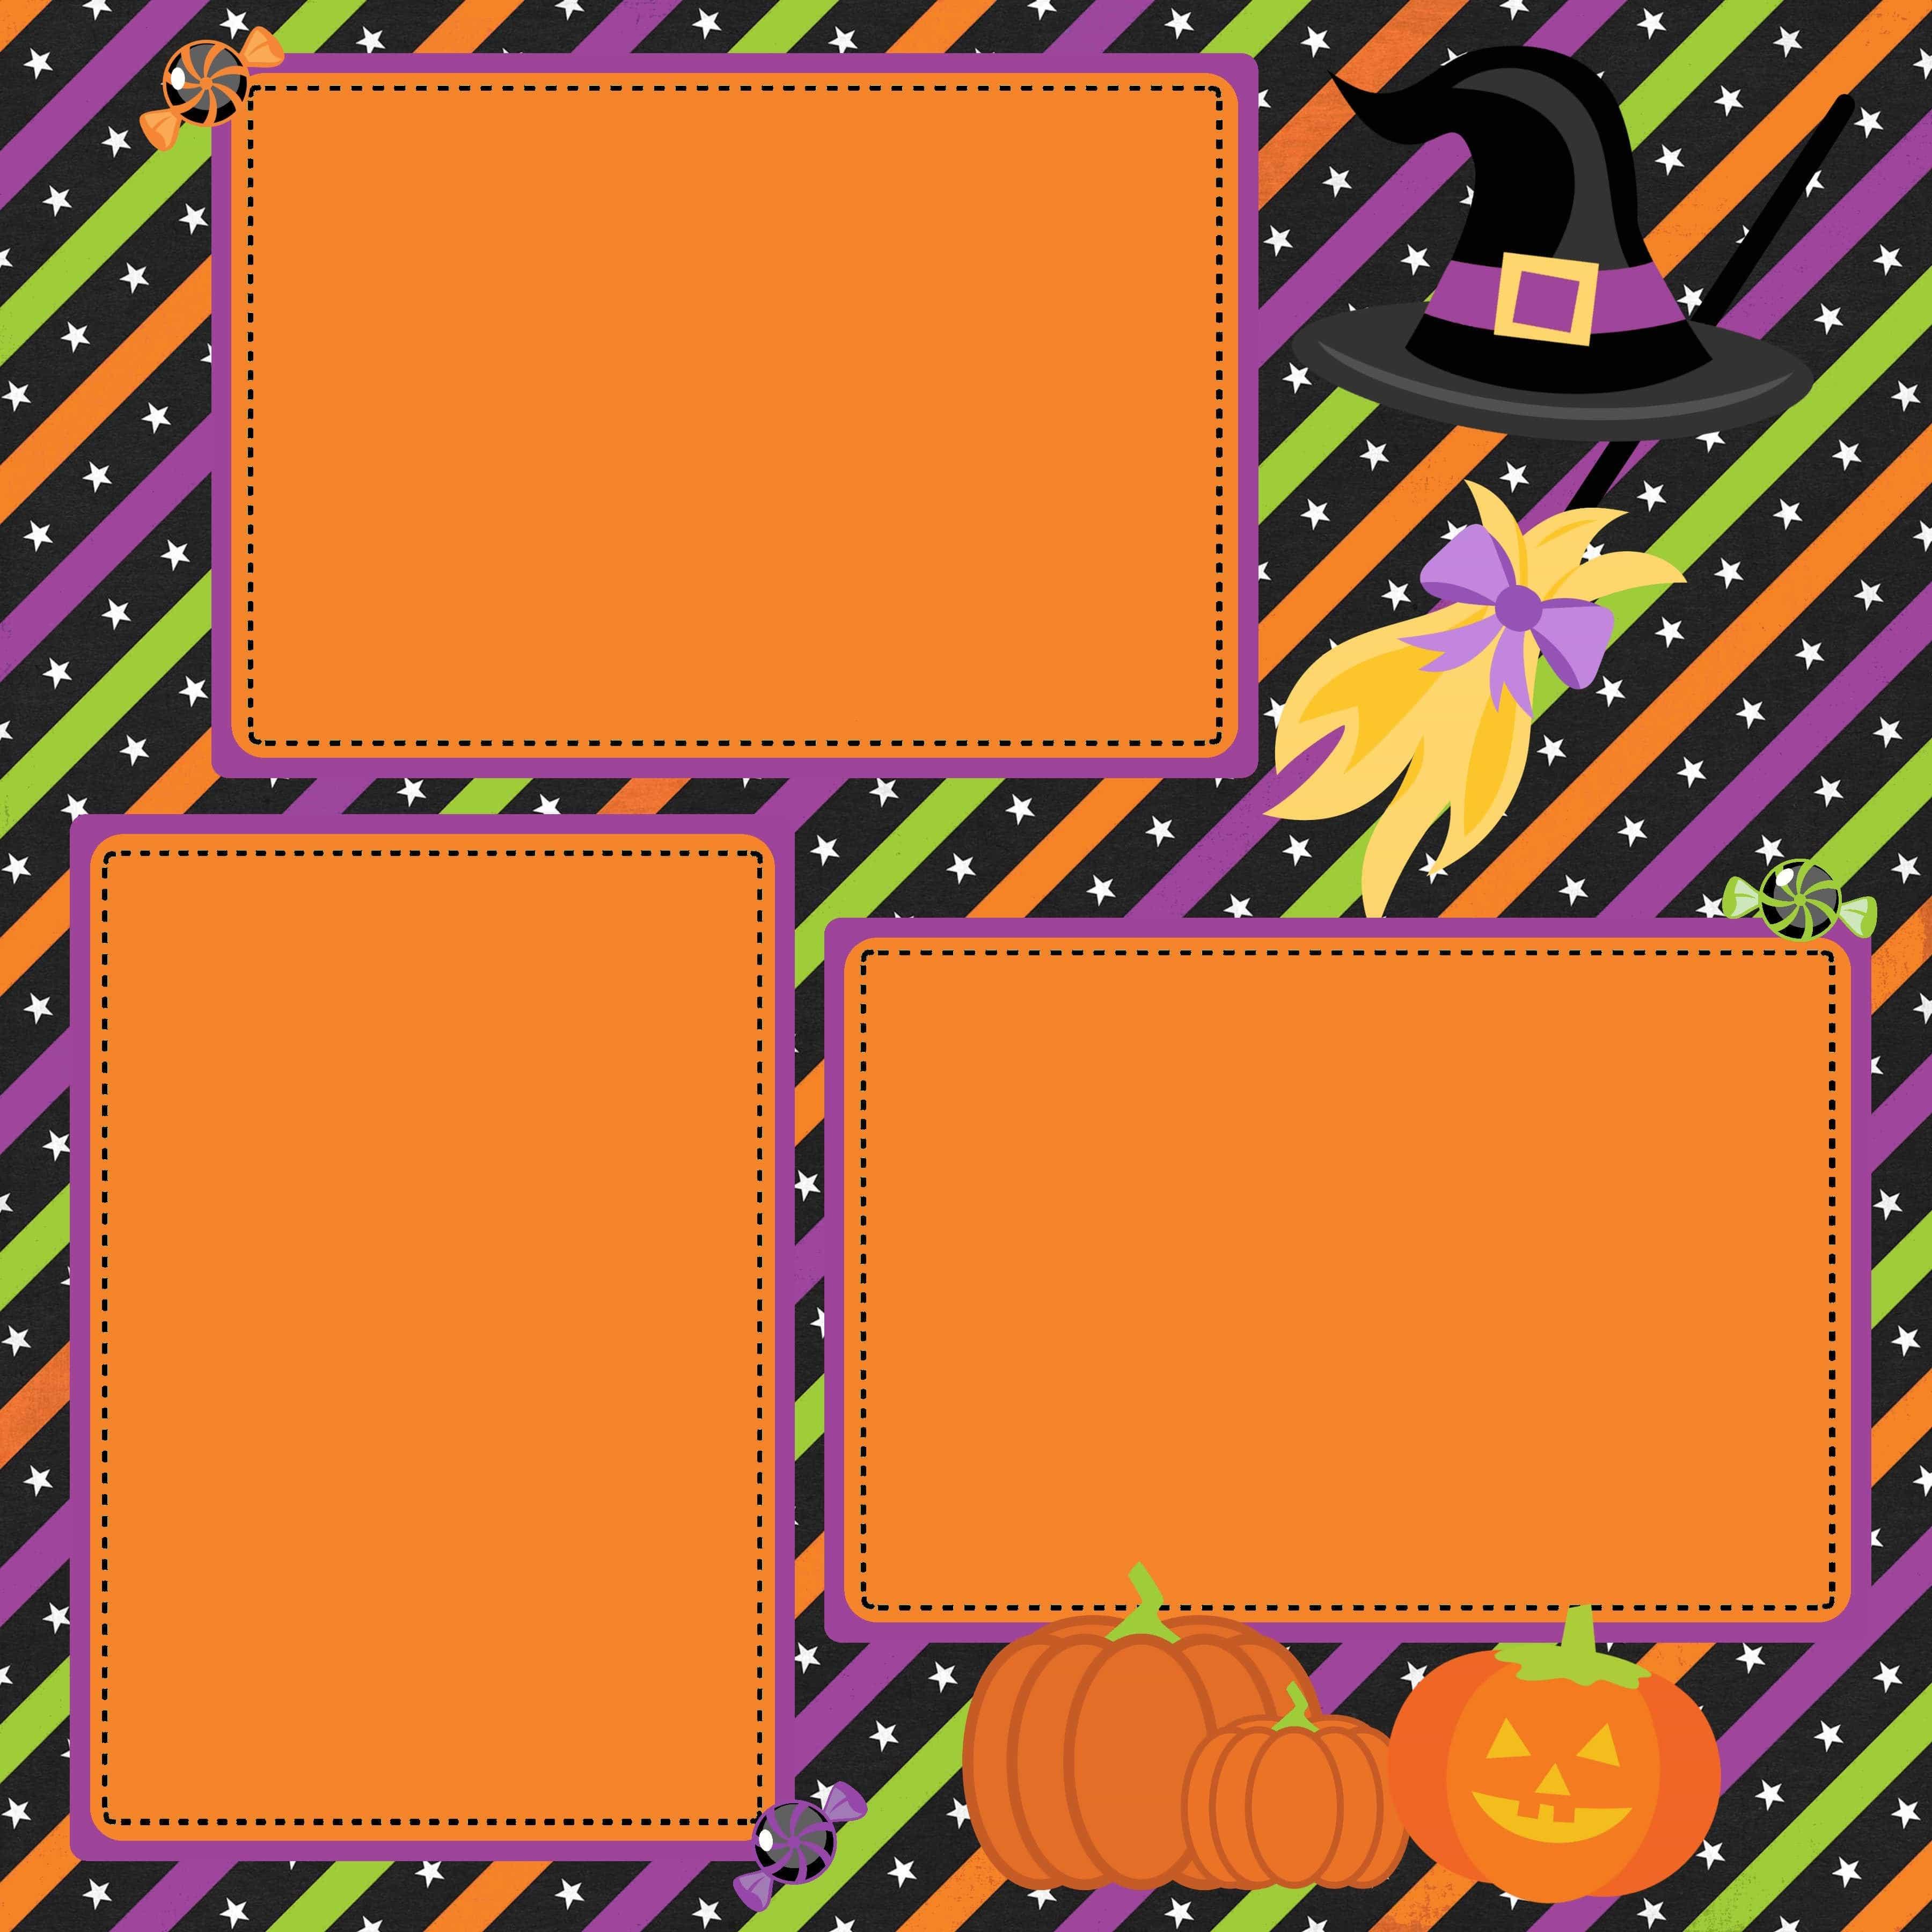 Trick Or Treat Halloween (2) - 12 x 12 Premade, Printed Scrapbook Pages by SSC Designs - Scrapbook Supply Companies